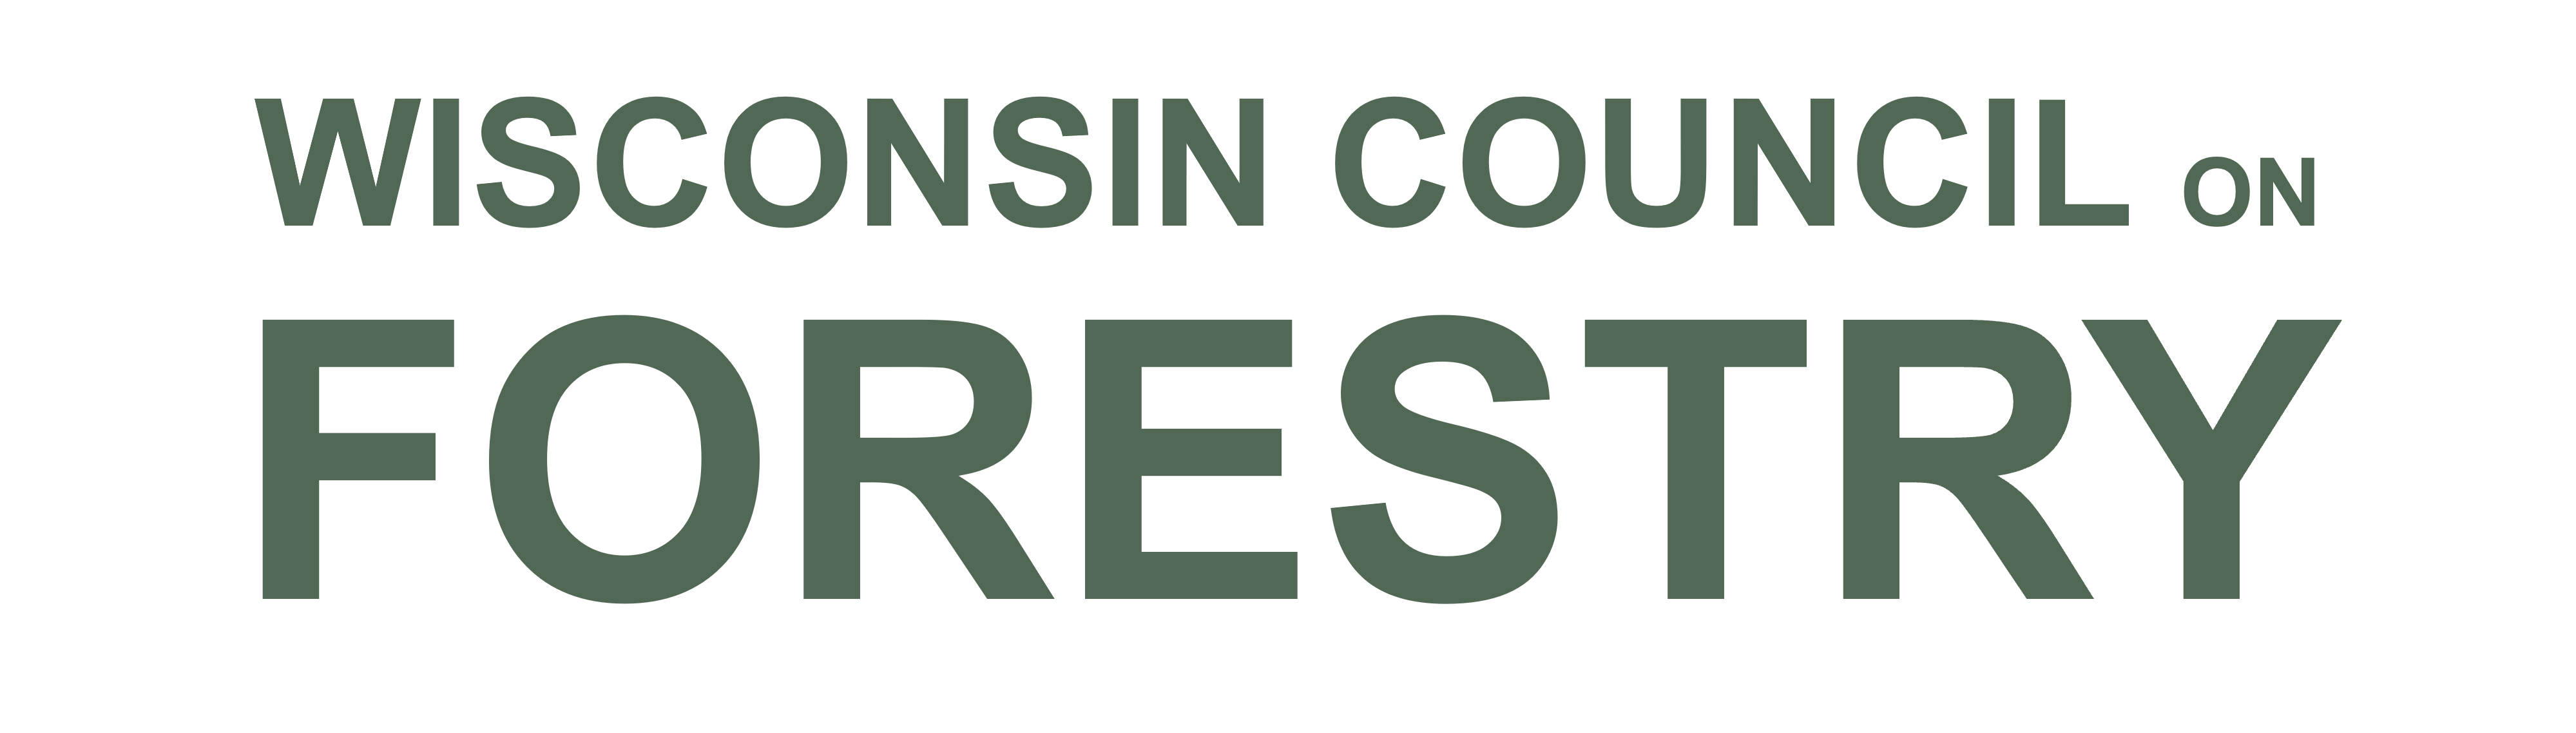 Wisconsin Council on Forestry Logo